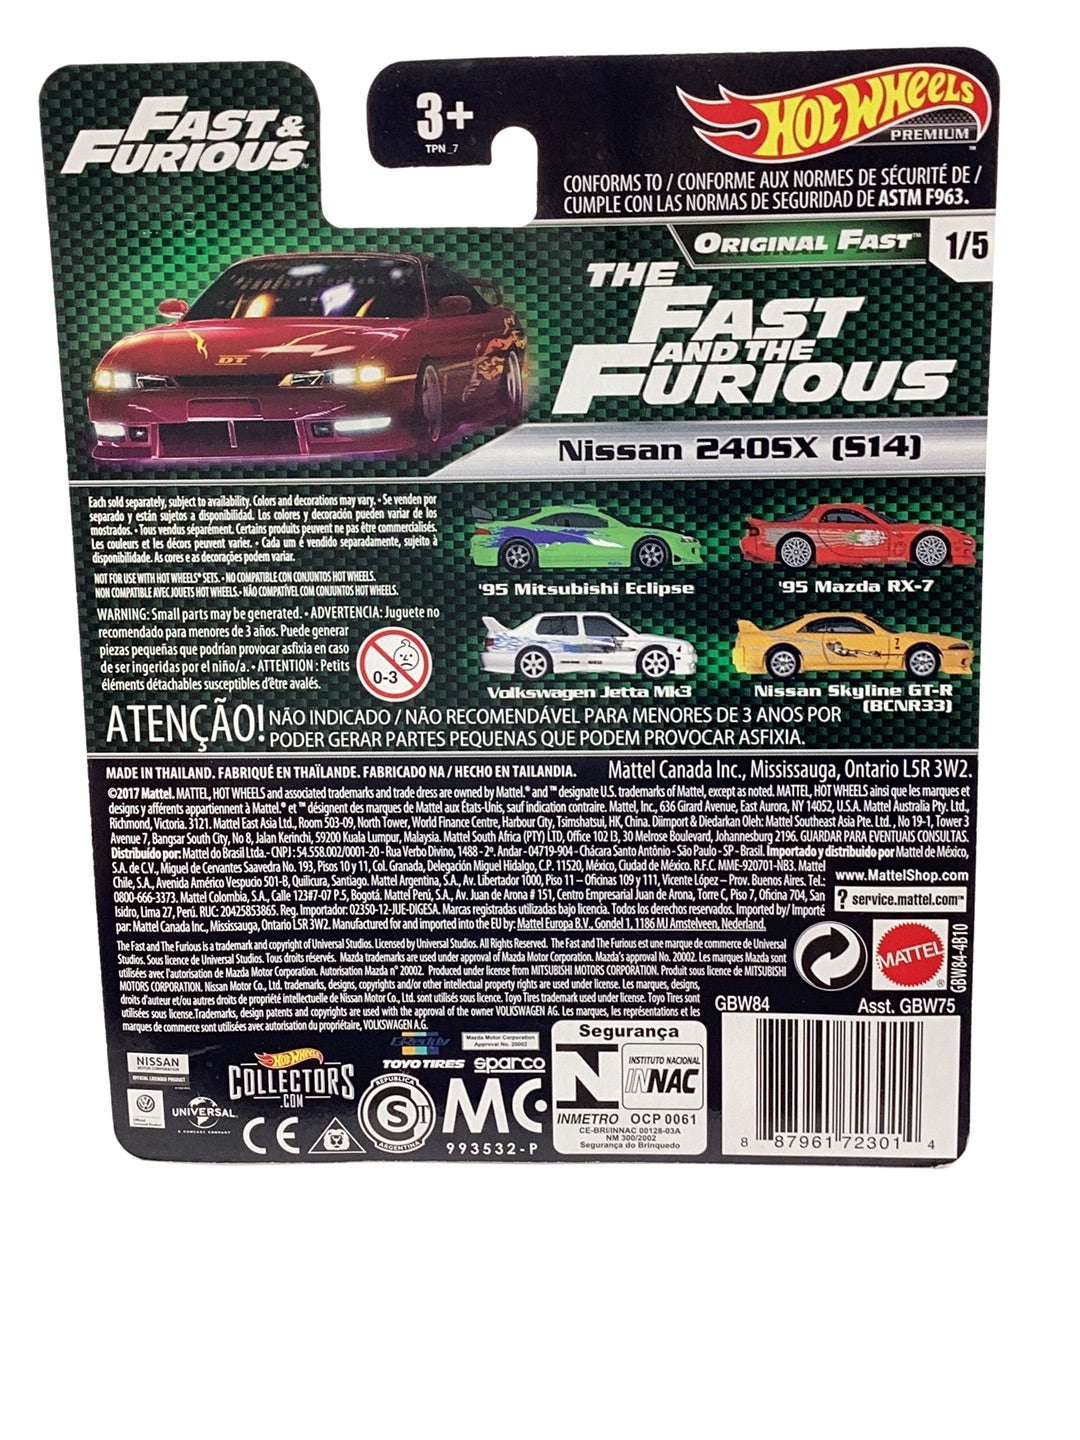 Hot wheels premium fast and furious Original Fast 1/5 Nissan 240SX (S14) with protector